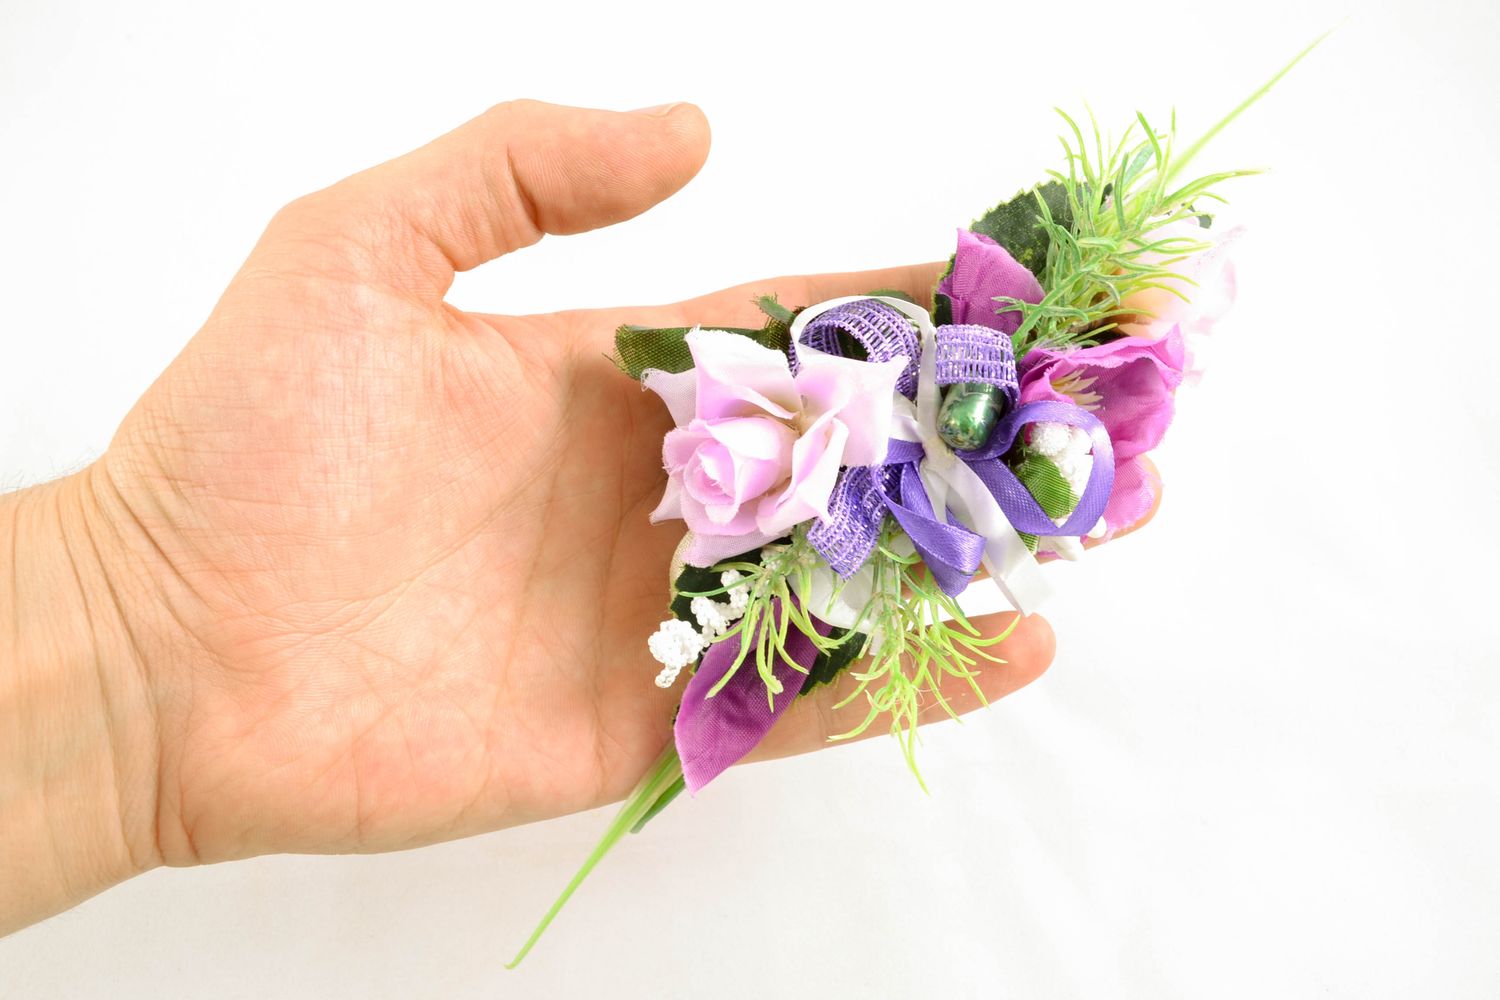 Boutonniere for an Easter basket
Wrist boutonniere photo 2